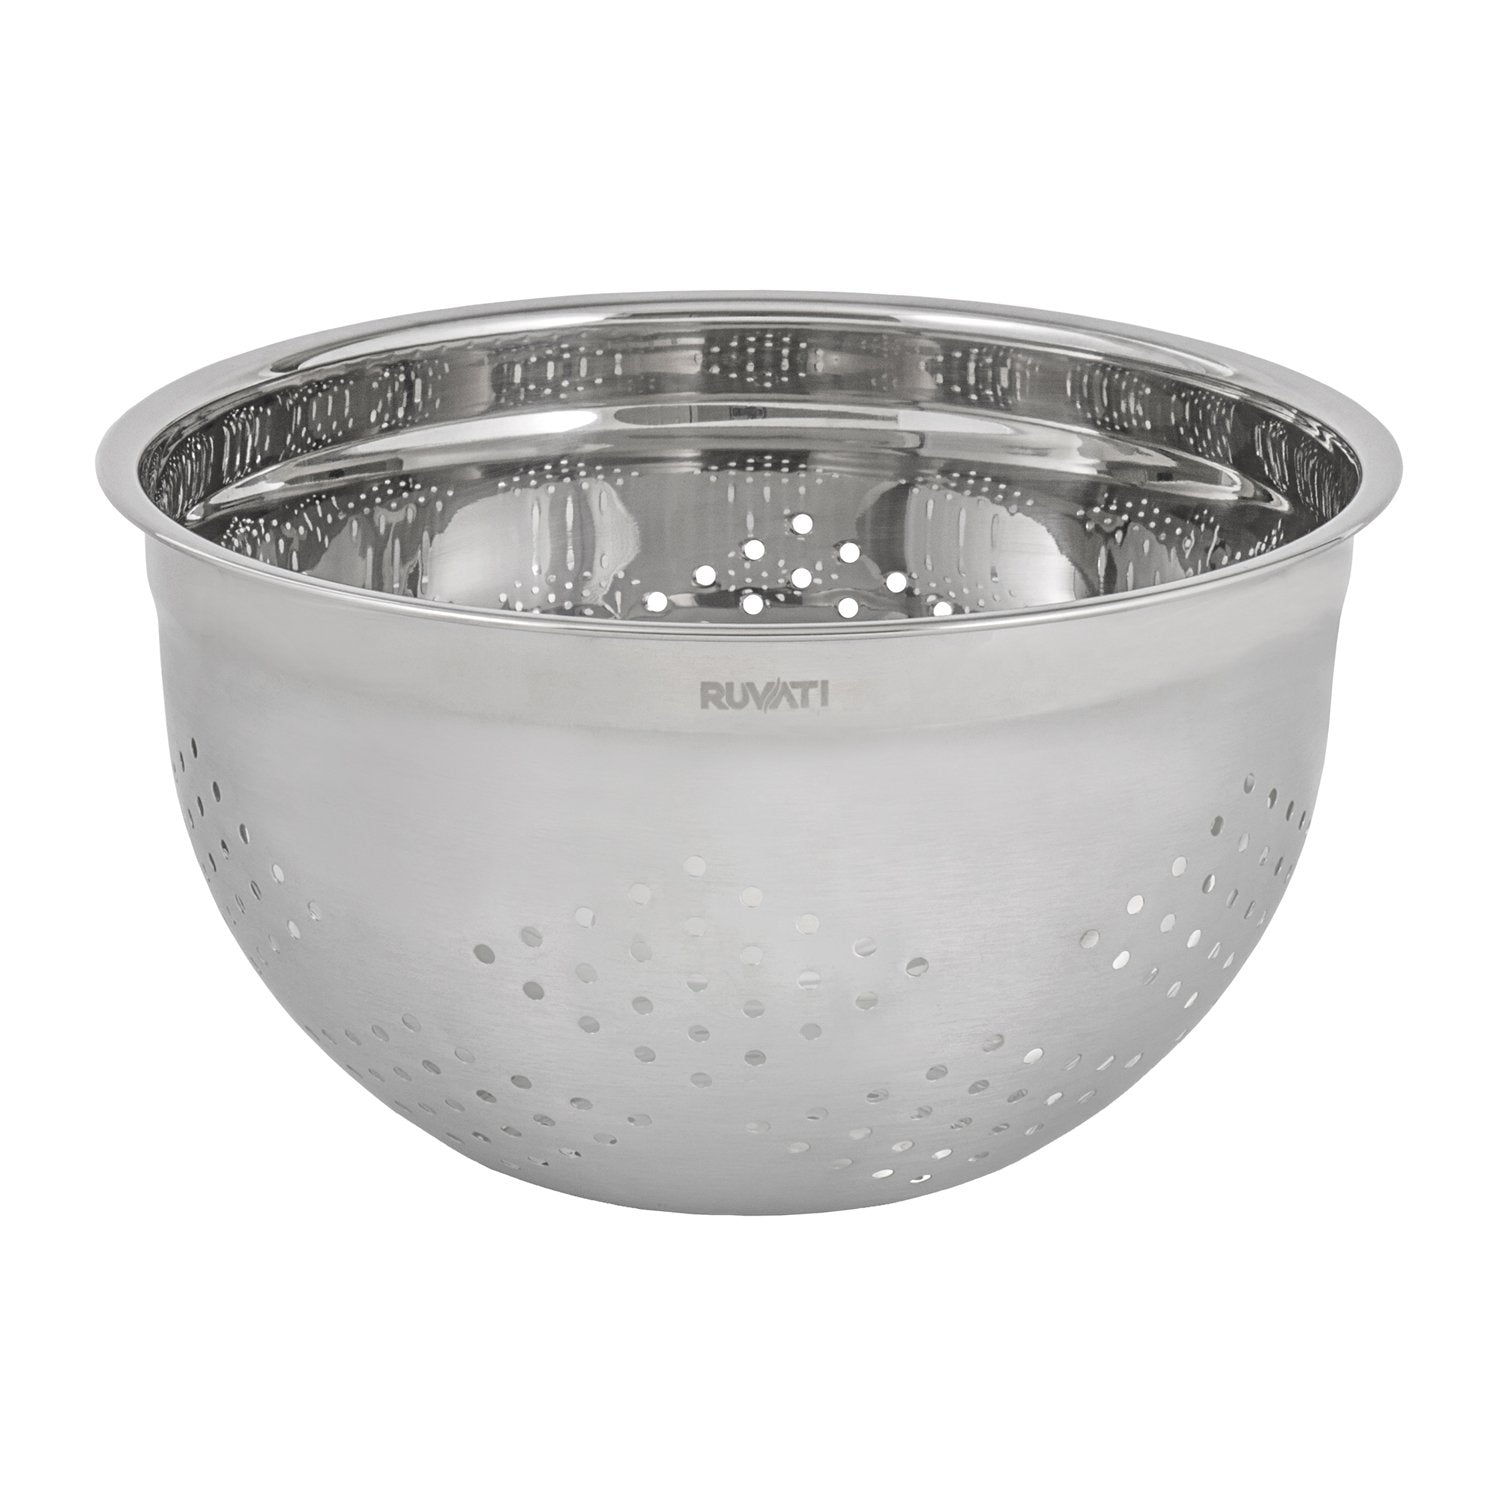 Mixing Bowl and Colander Set for Ruvati Workstation Sinks RVA1288